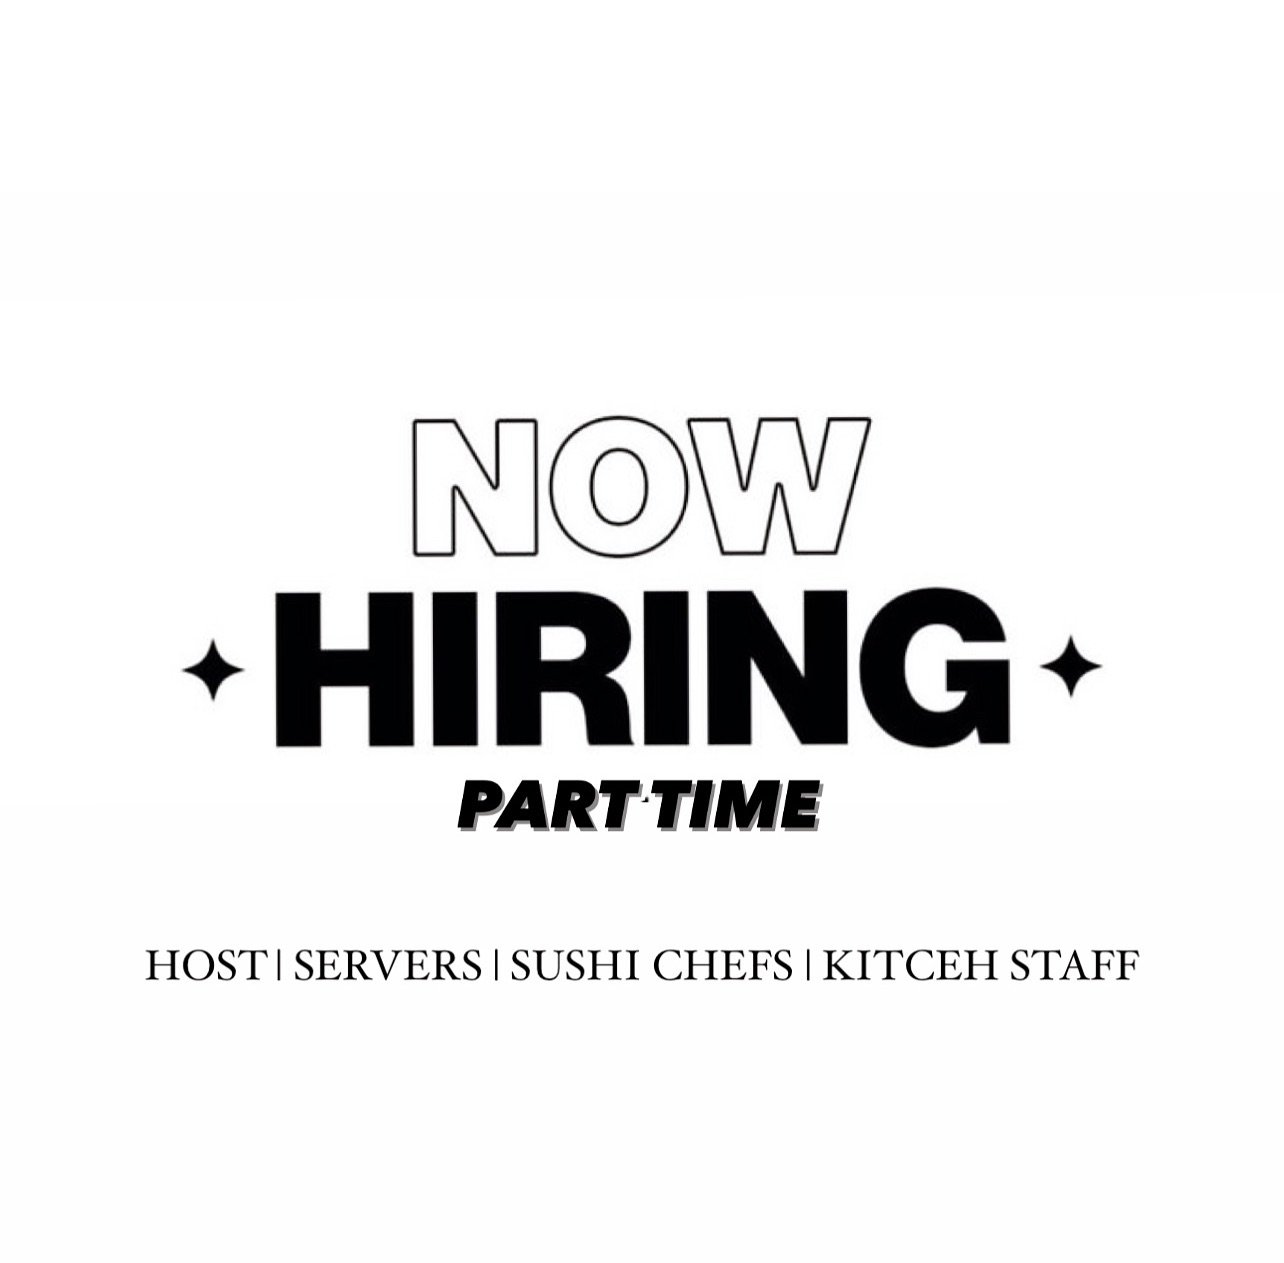 Join our family 🍣 
We are now hiring part time for all positions. Apply online at www.biteabitnashville.com